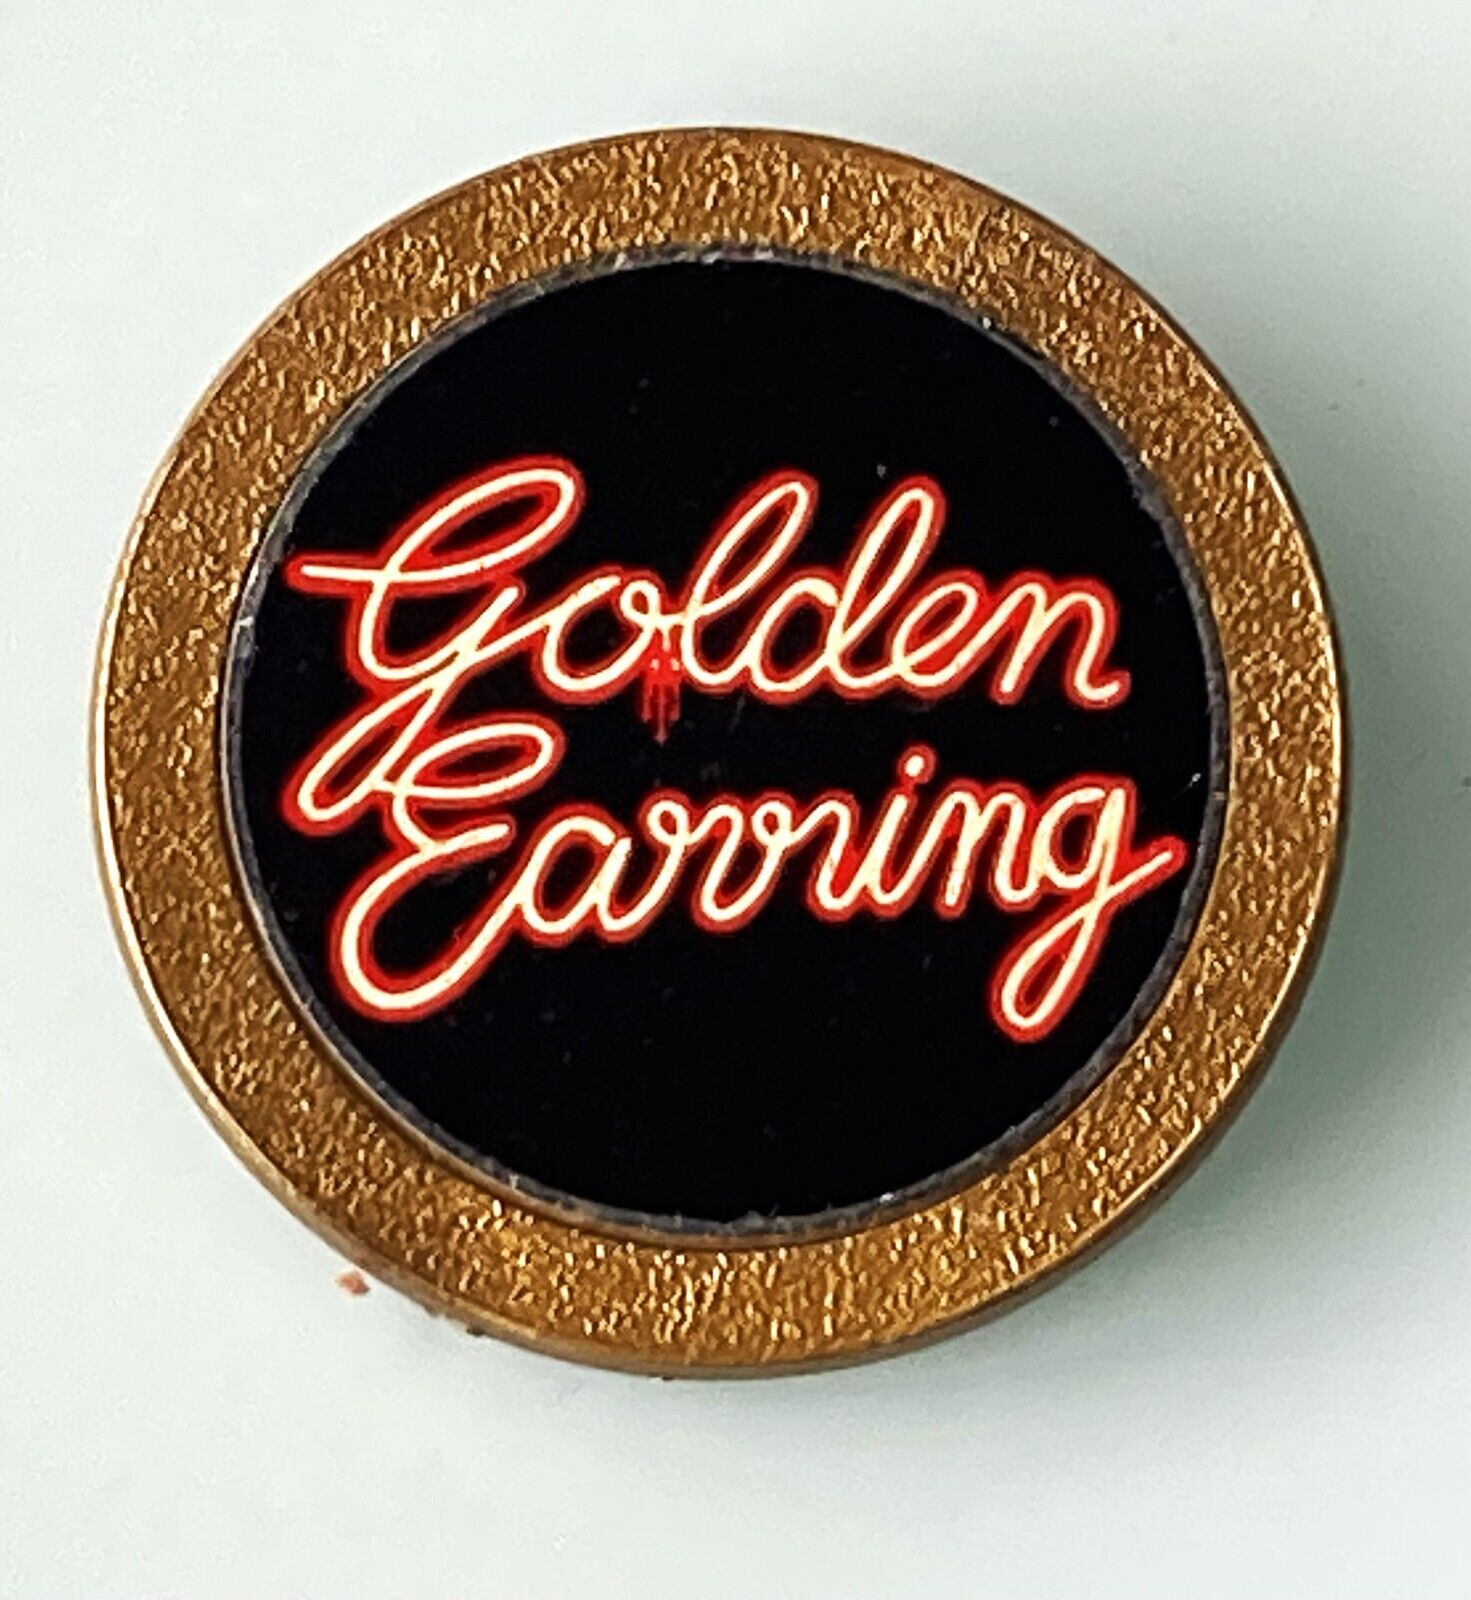 GOLDEN EARRING VINTAGE PLASTIC PIN BADGE FROM THE 1970\'S RADAR LOVE DUTCH BAND